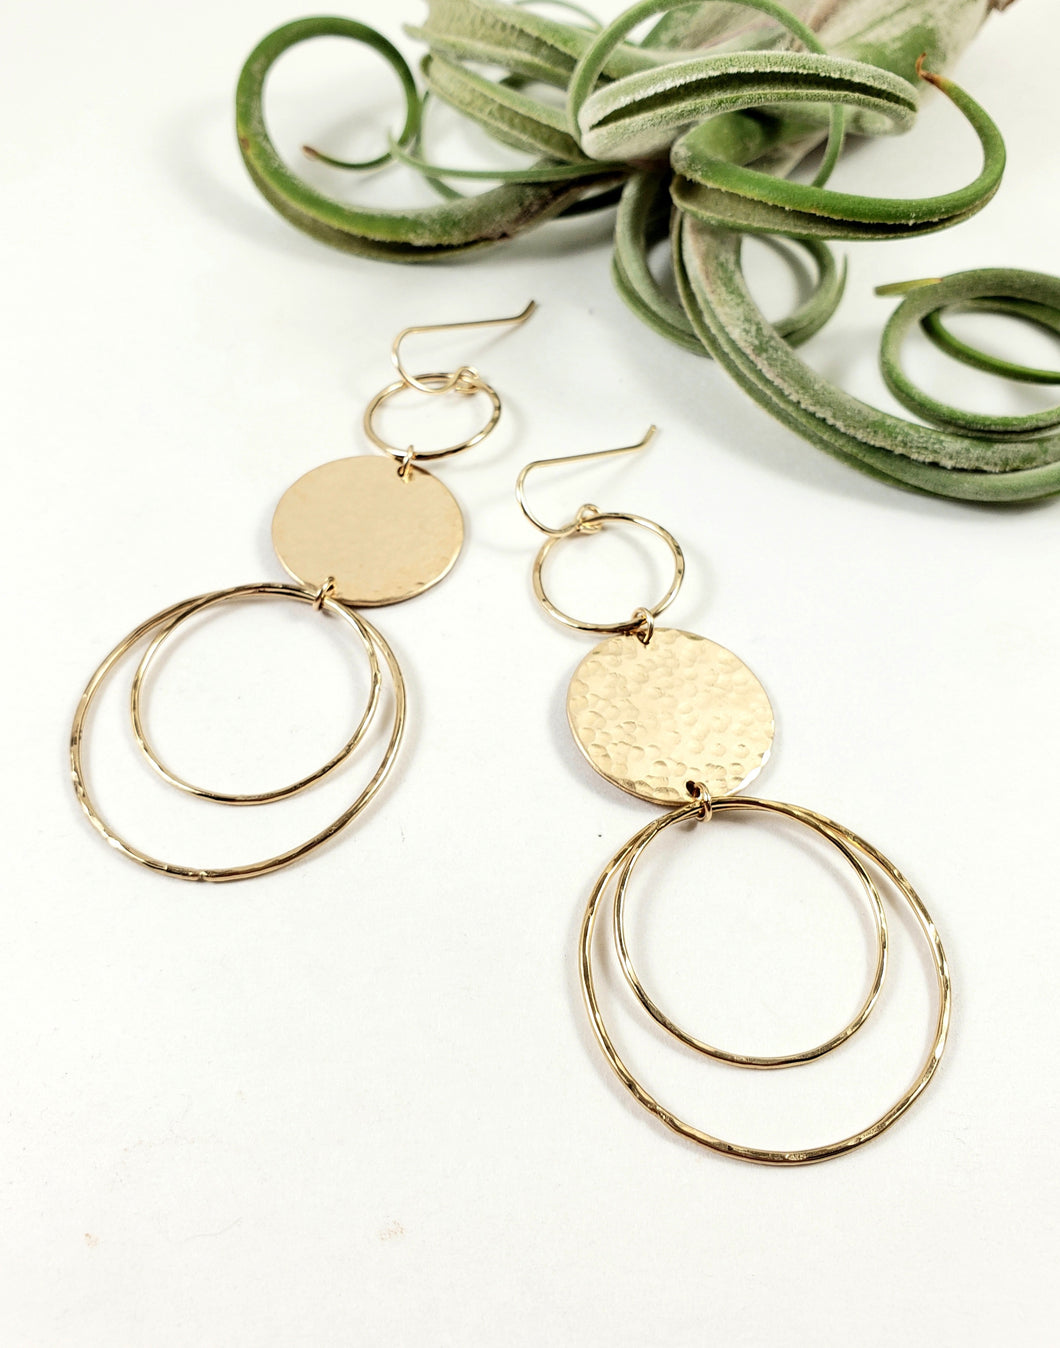 All hand cut/hammered 14k gold-filled metalwork in Gold Hoops